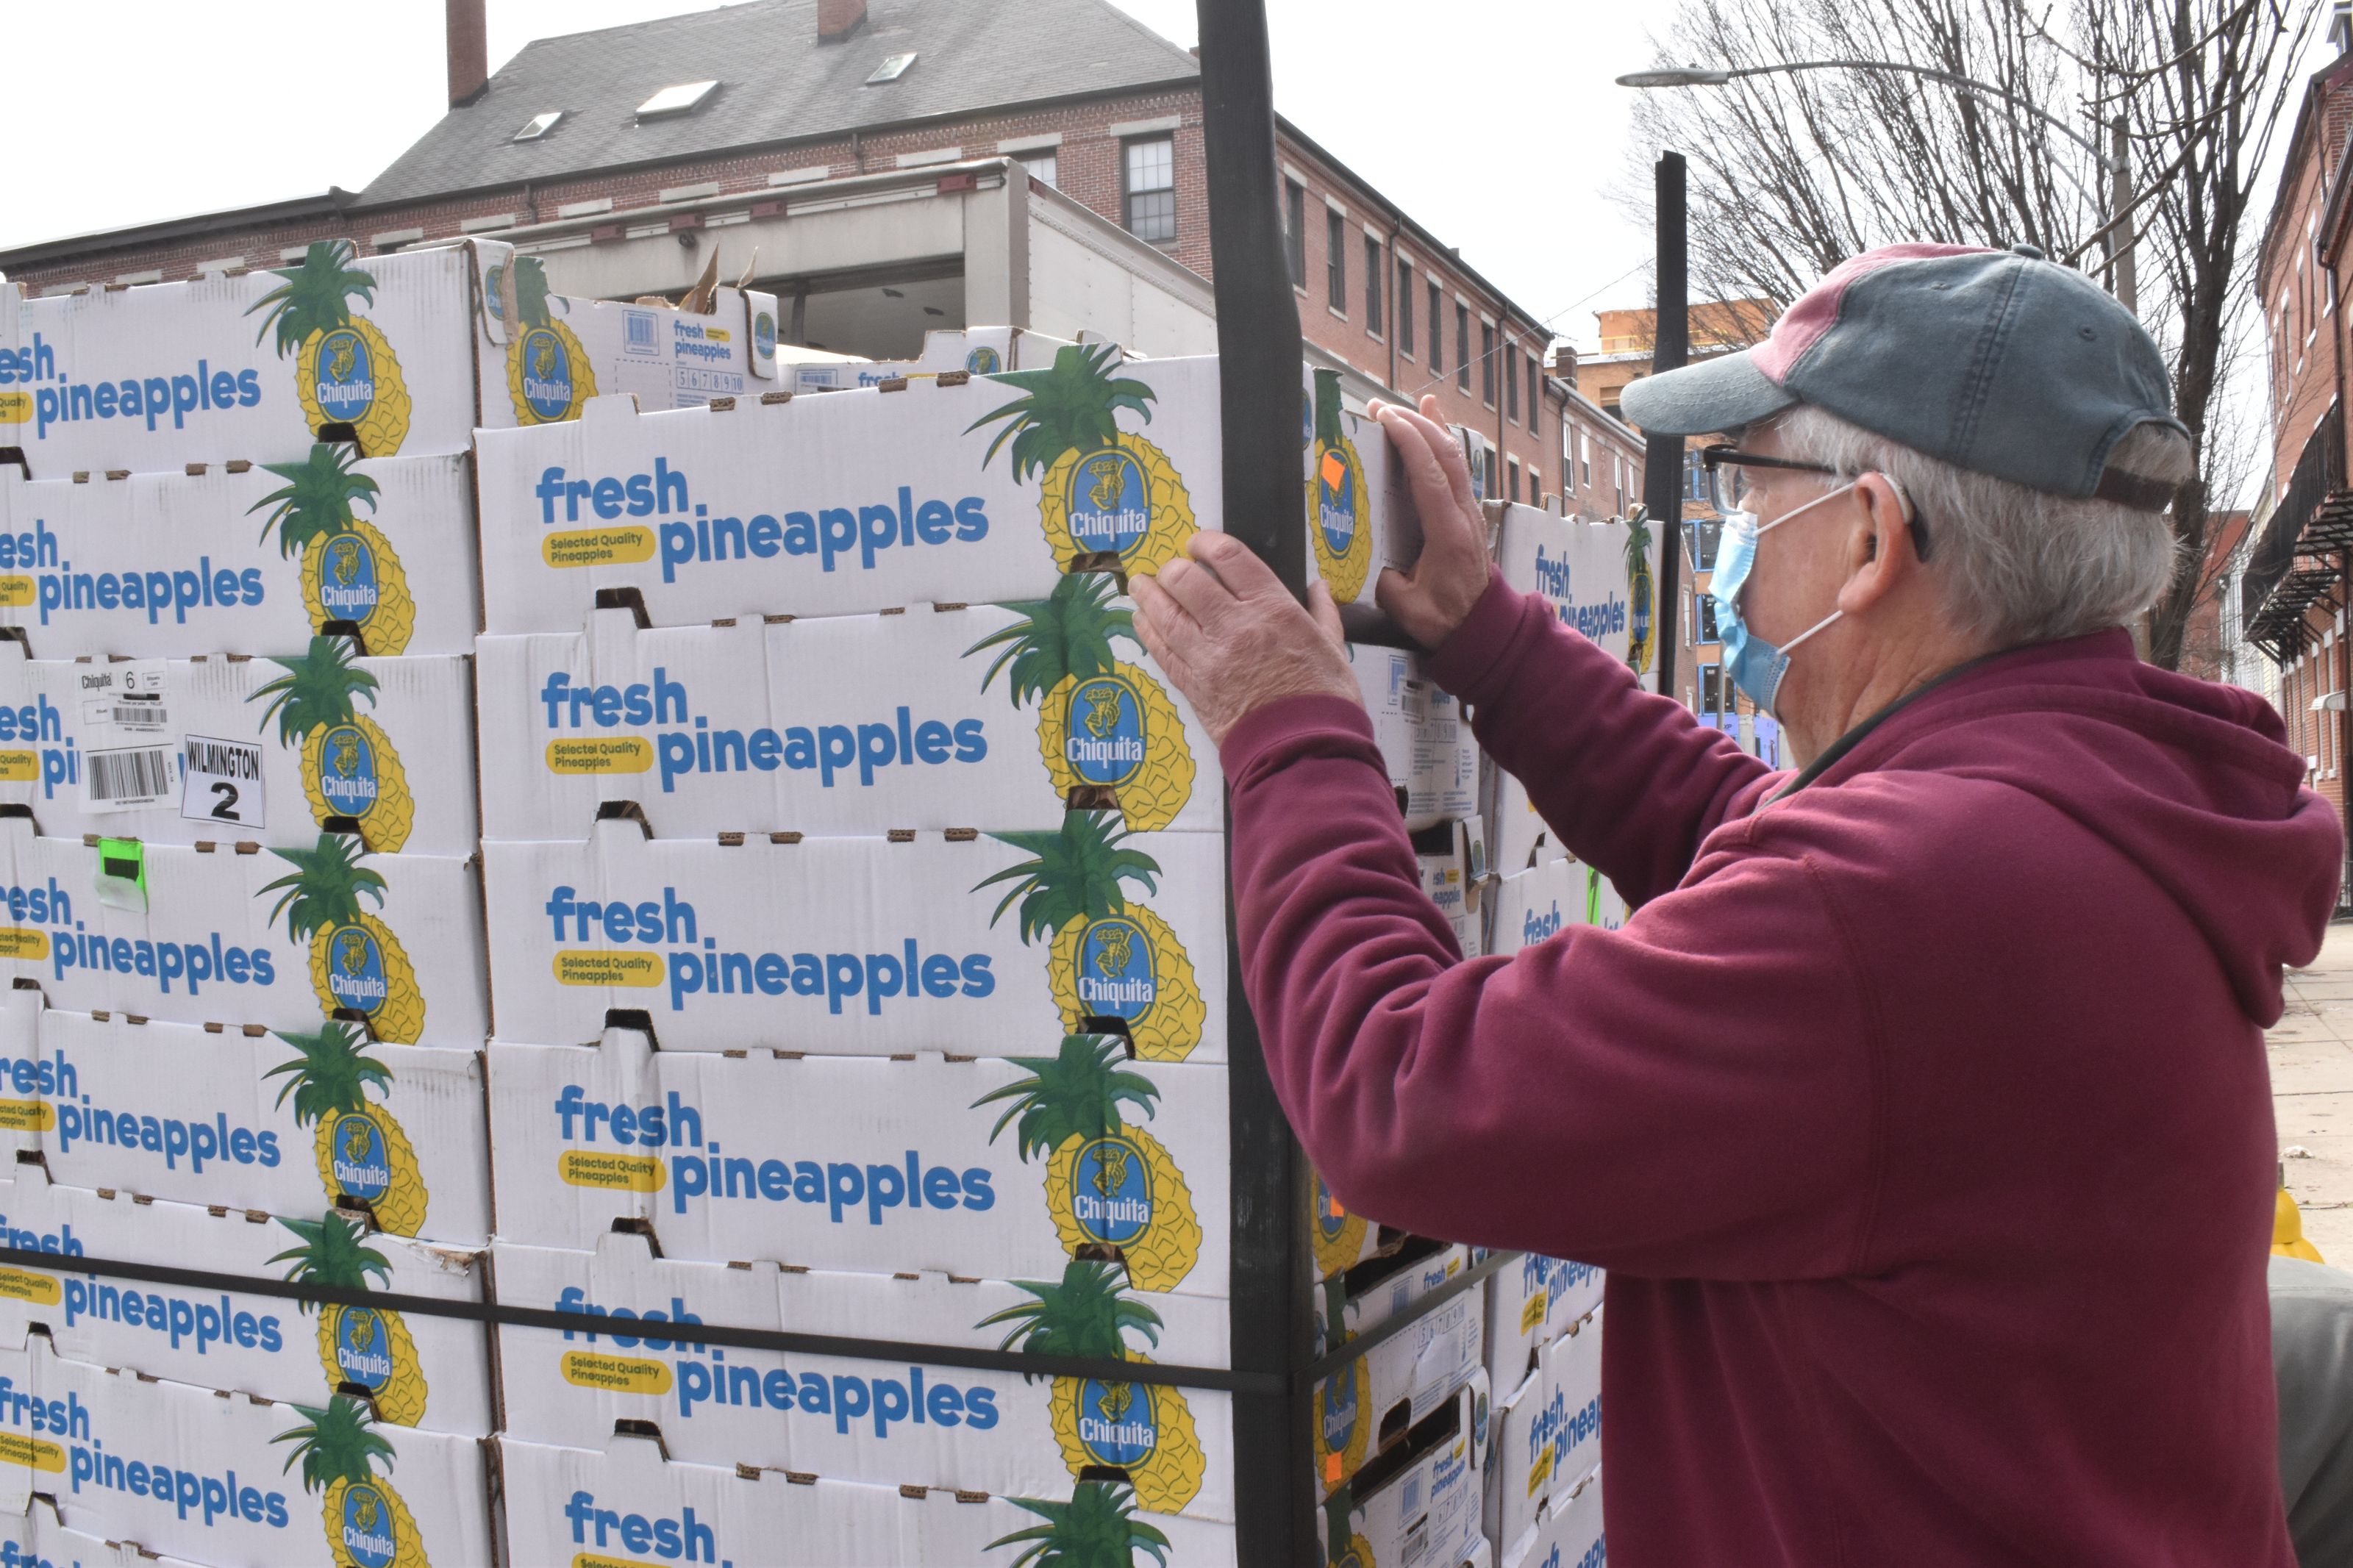 A shipment of pineapples arrives on a Monday morning, March 15, 2022 at East Boston Community Soup Kitchen. The next day, the hours spent unloading and packaging them today will go by in a flash tomorrow as they're distributed to hundreds (photo credit: Elena Eberwein).